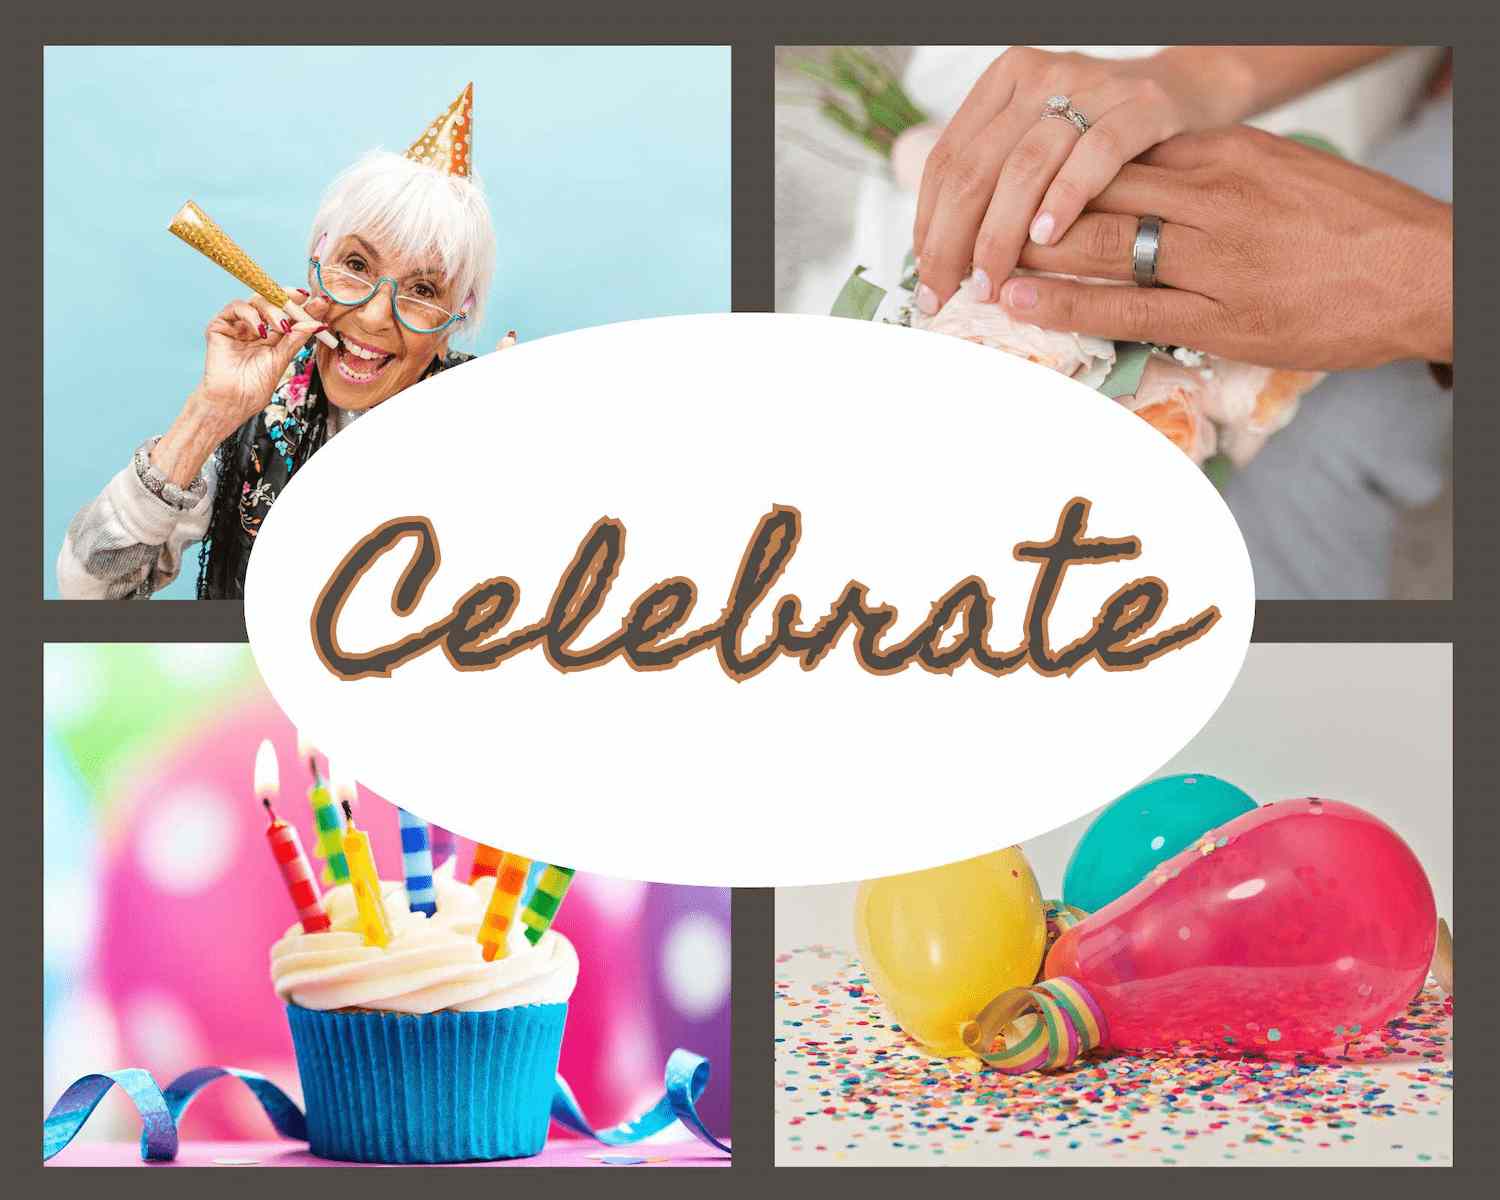 Celebrate with ideas for birthday parties, special occasions, weddings, and all life's milestones.